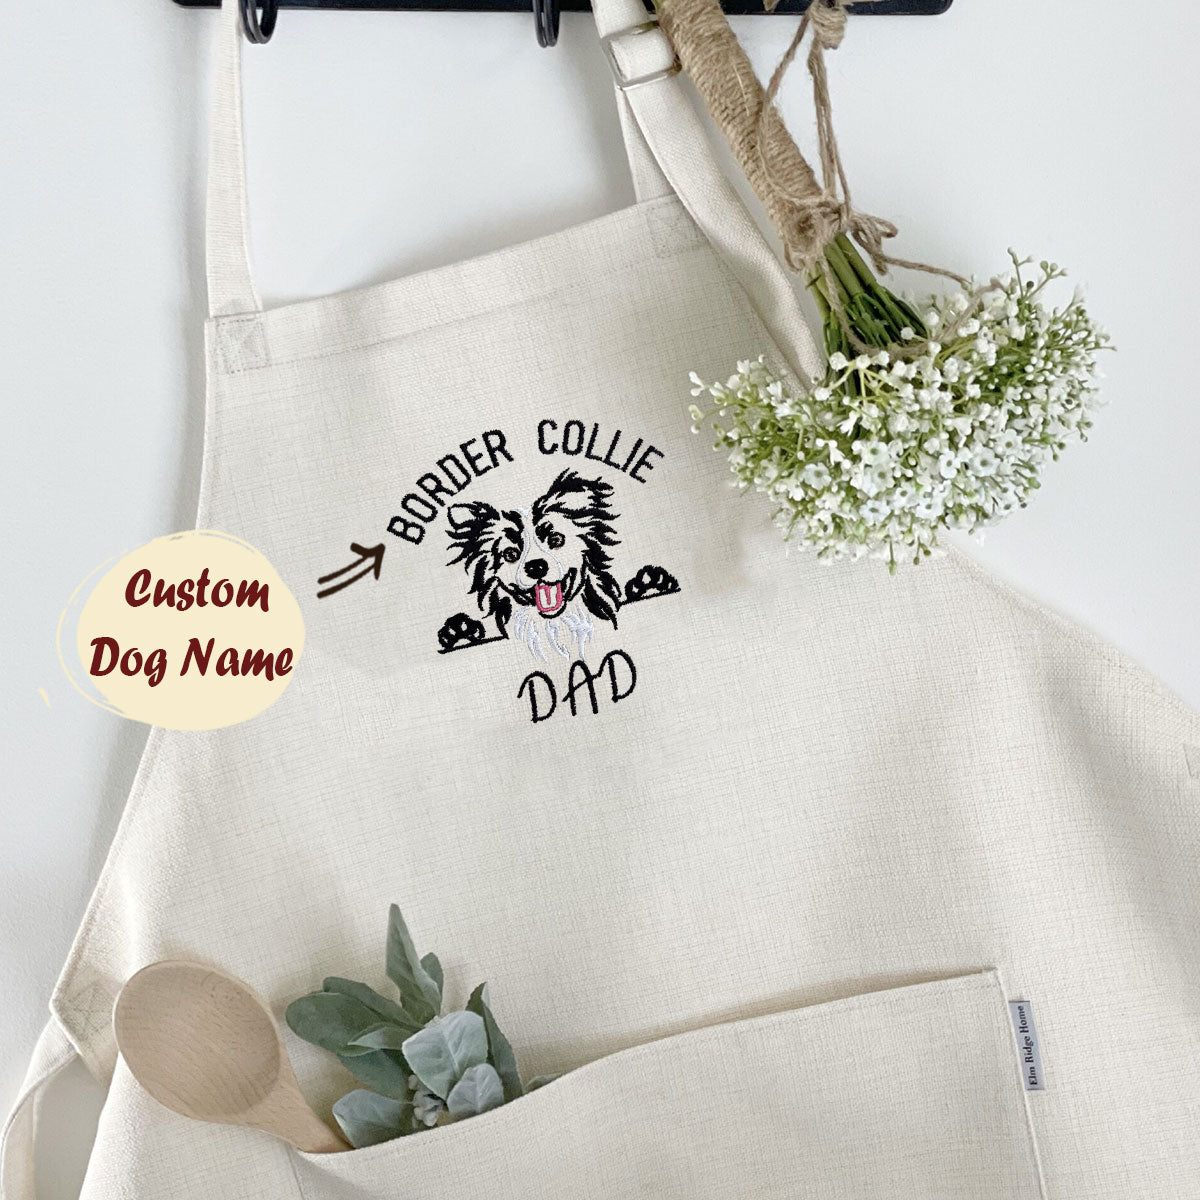 HBESTIE Gifts for Dad, Mom, Father's Day Gifts from Wife, Cooking Aprons  Gifts for Men, Women, Birthday Gifts for Dad, Him, Boyfriends, Dad Gifts  from